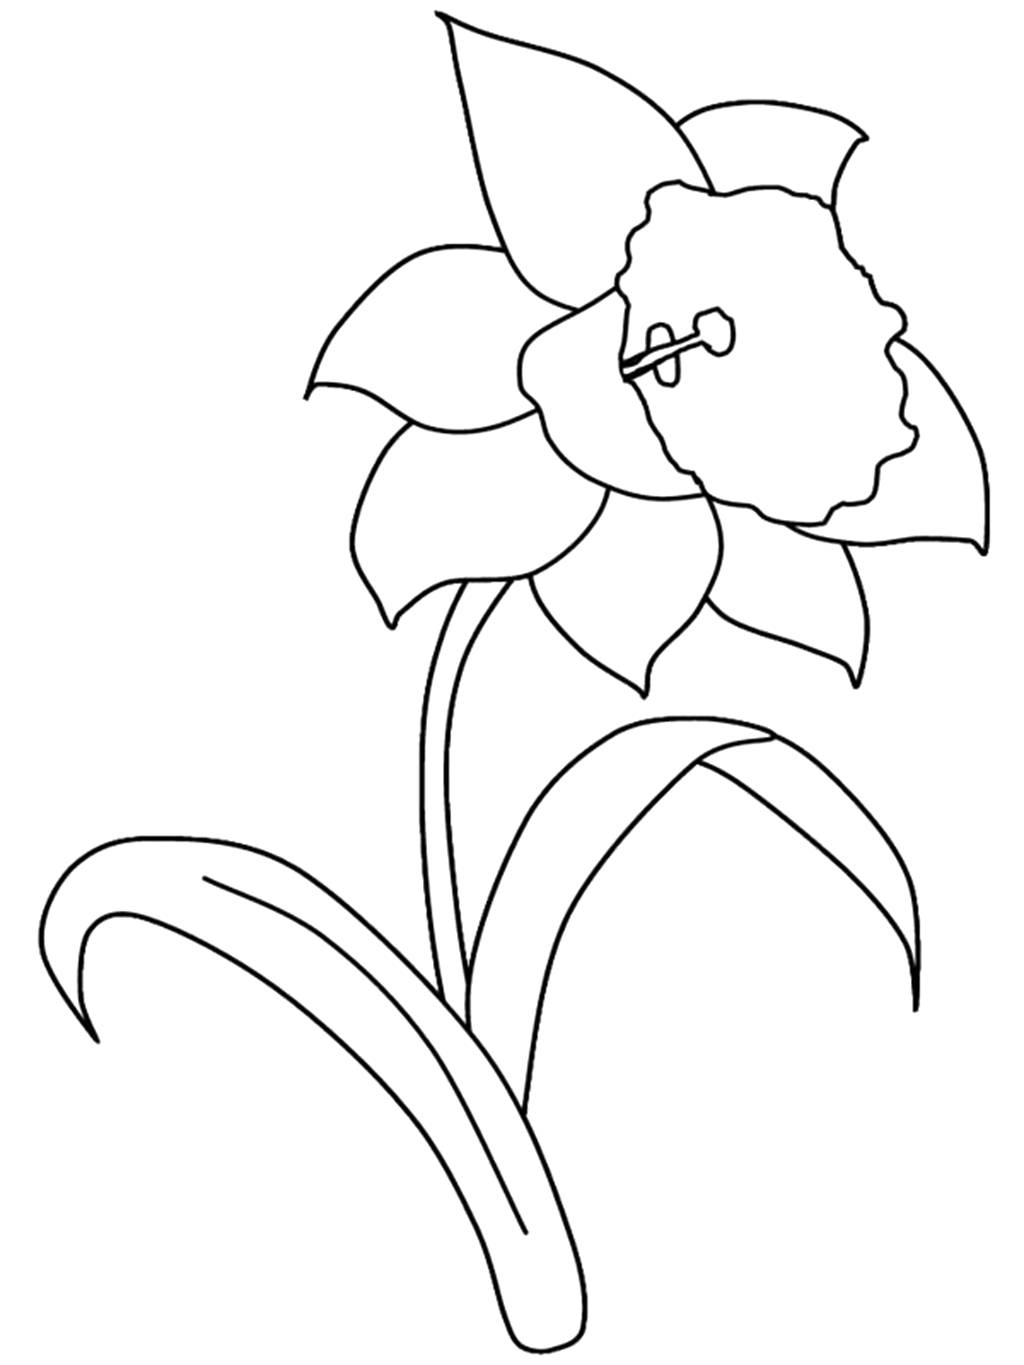 Daffodil Coloring Sheet Coloring Pages